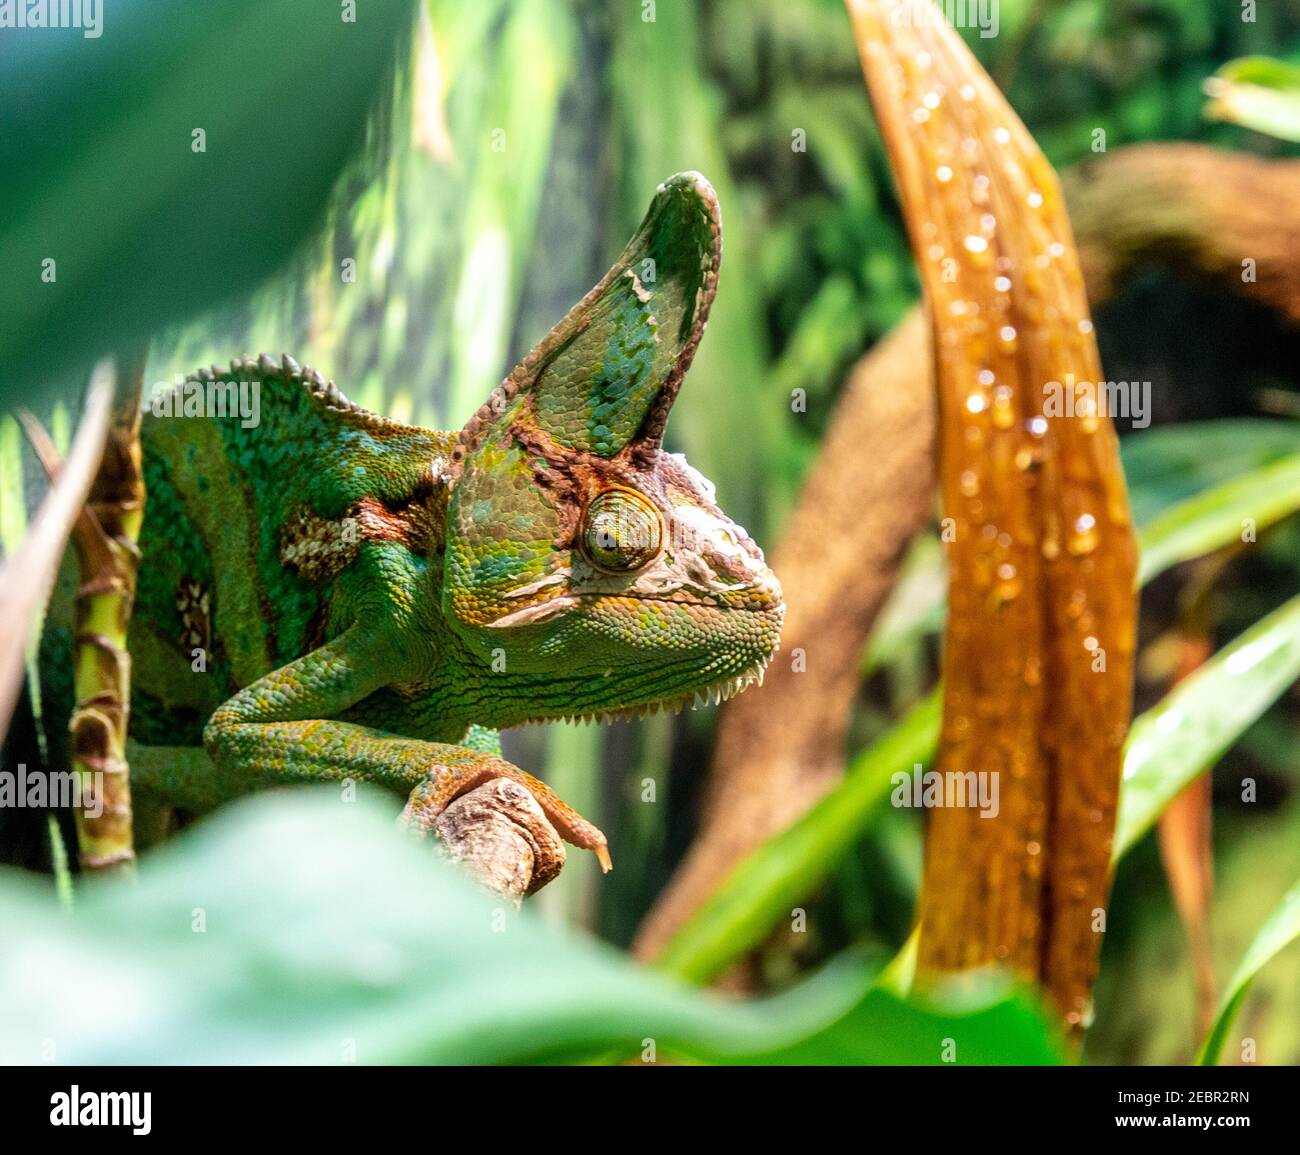 Chameleons mostly live in the rain forests and deserts of Africa. The color of their skin helps them blend in with their habitats. Chameleons that han Stock Photo